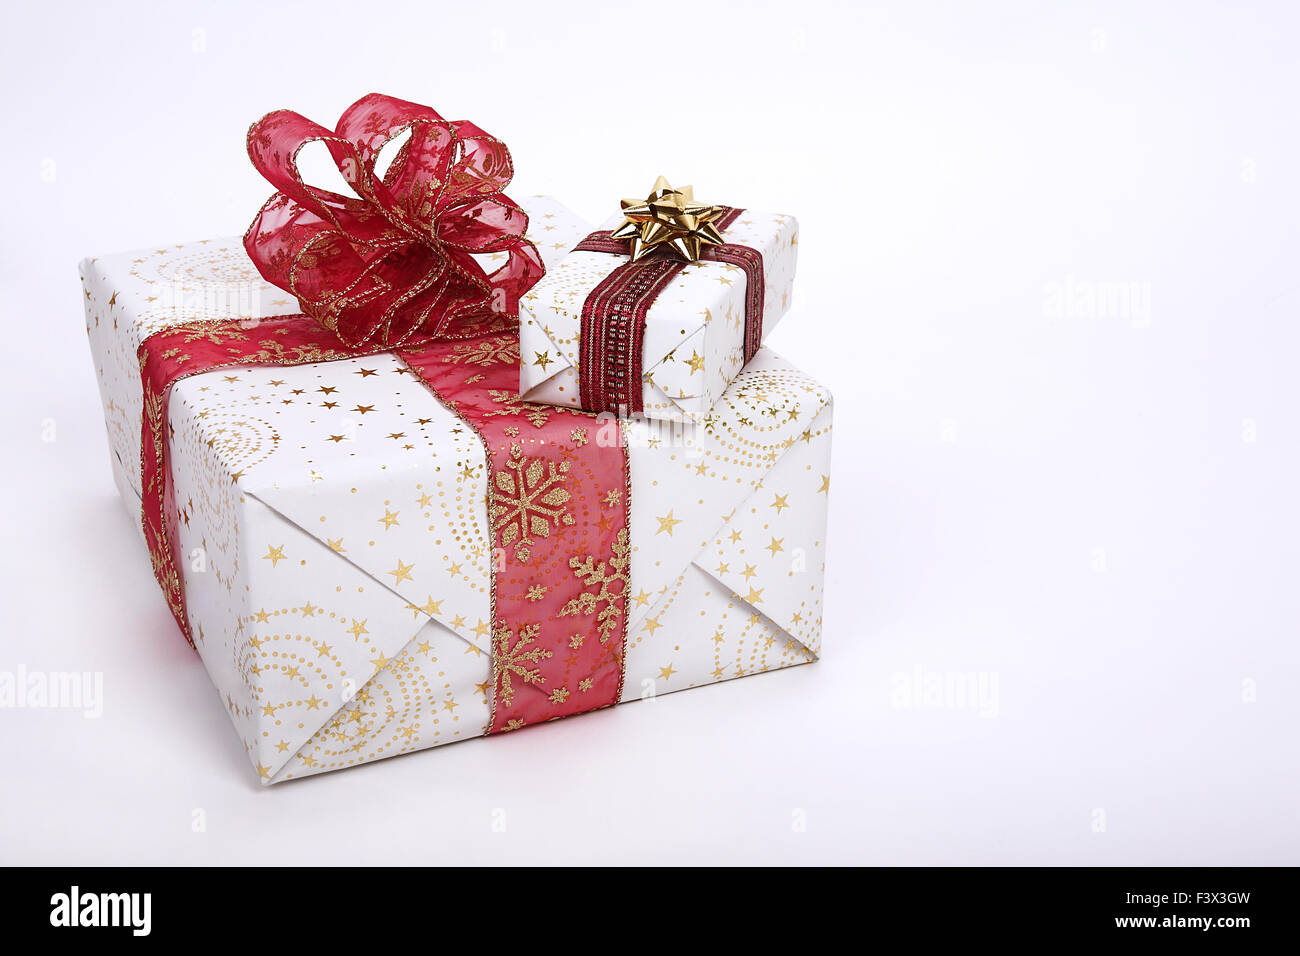 Christmas packages Stock Photo